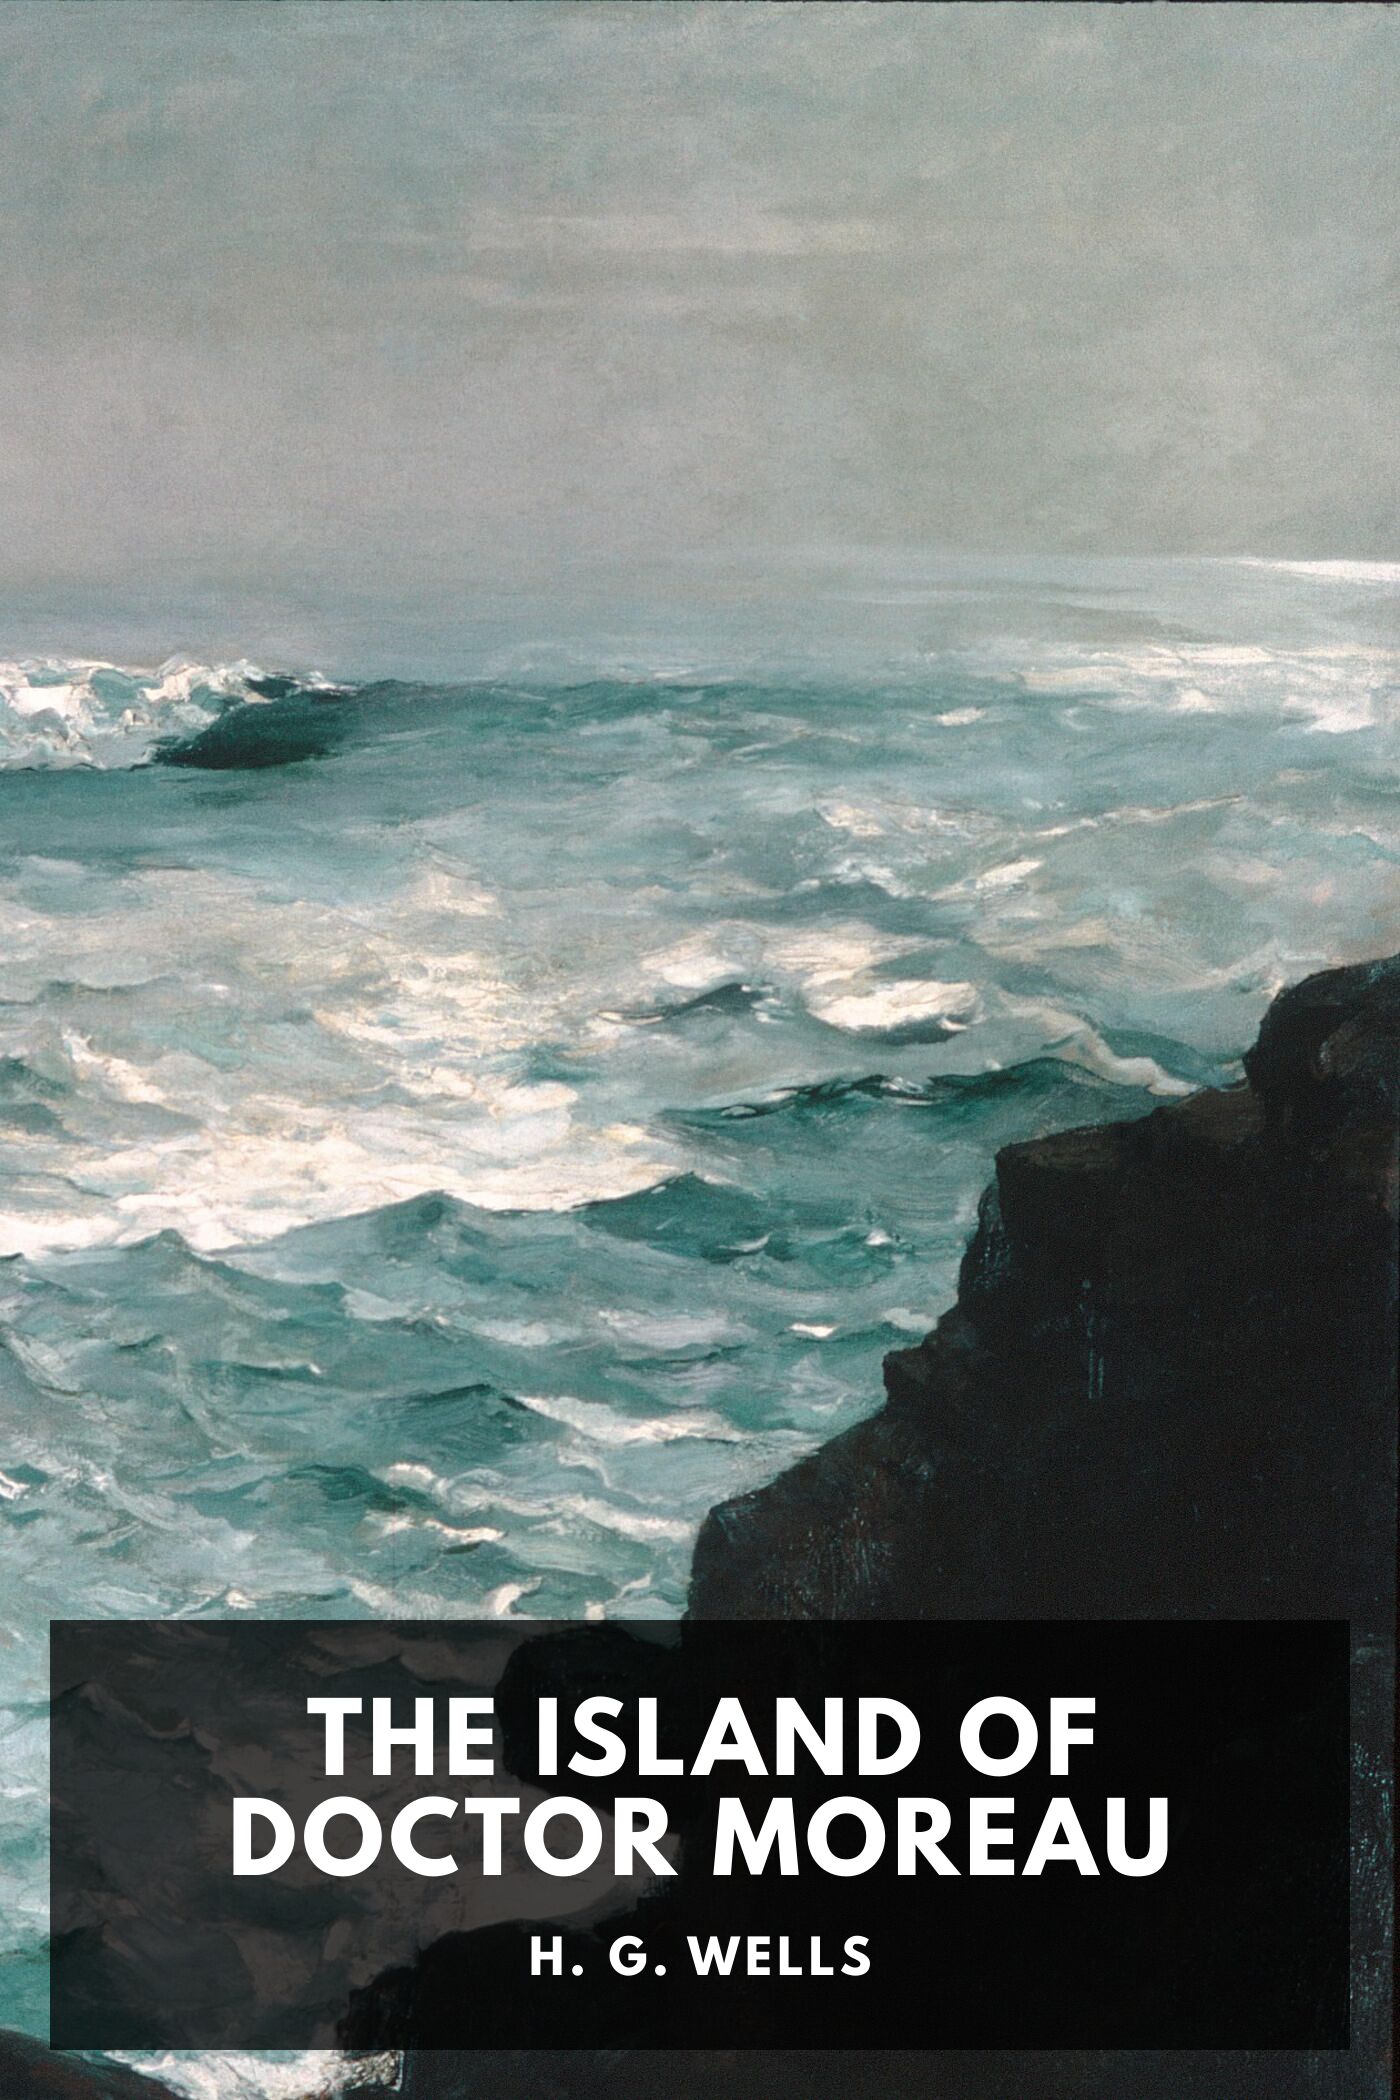 The Island of Dr. Moreau by H.G. Wells